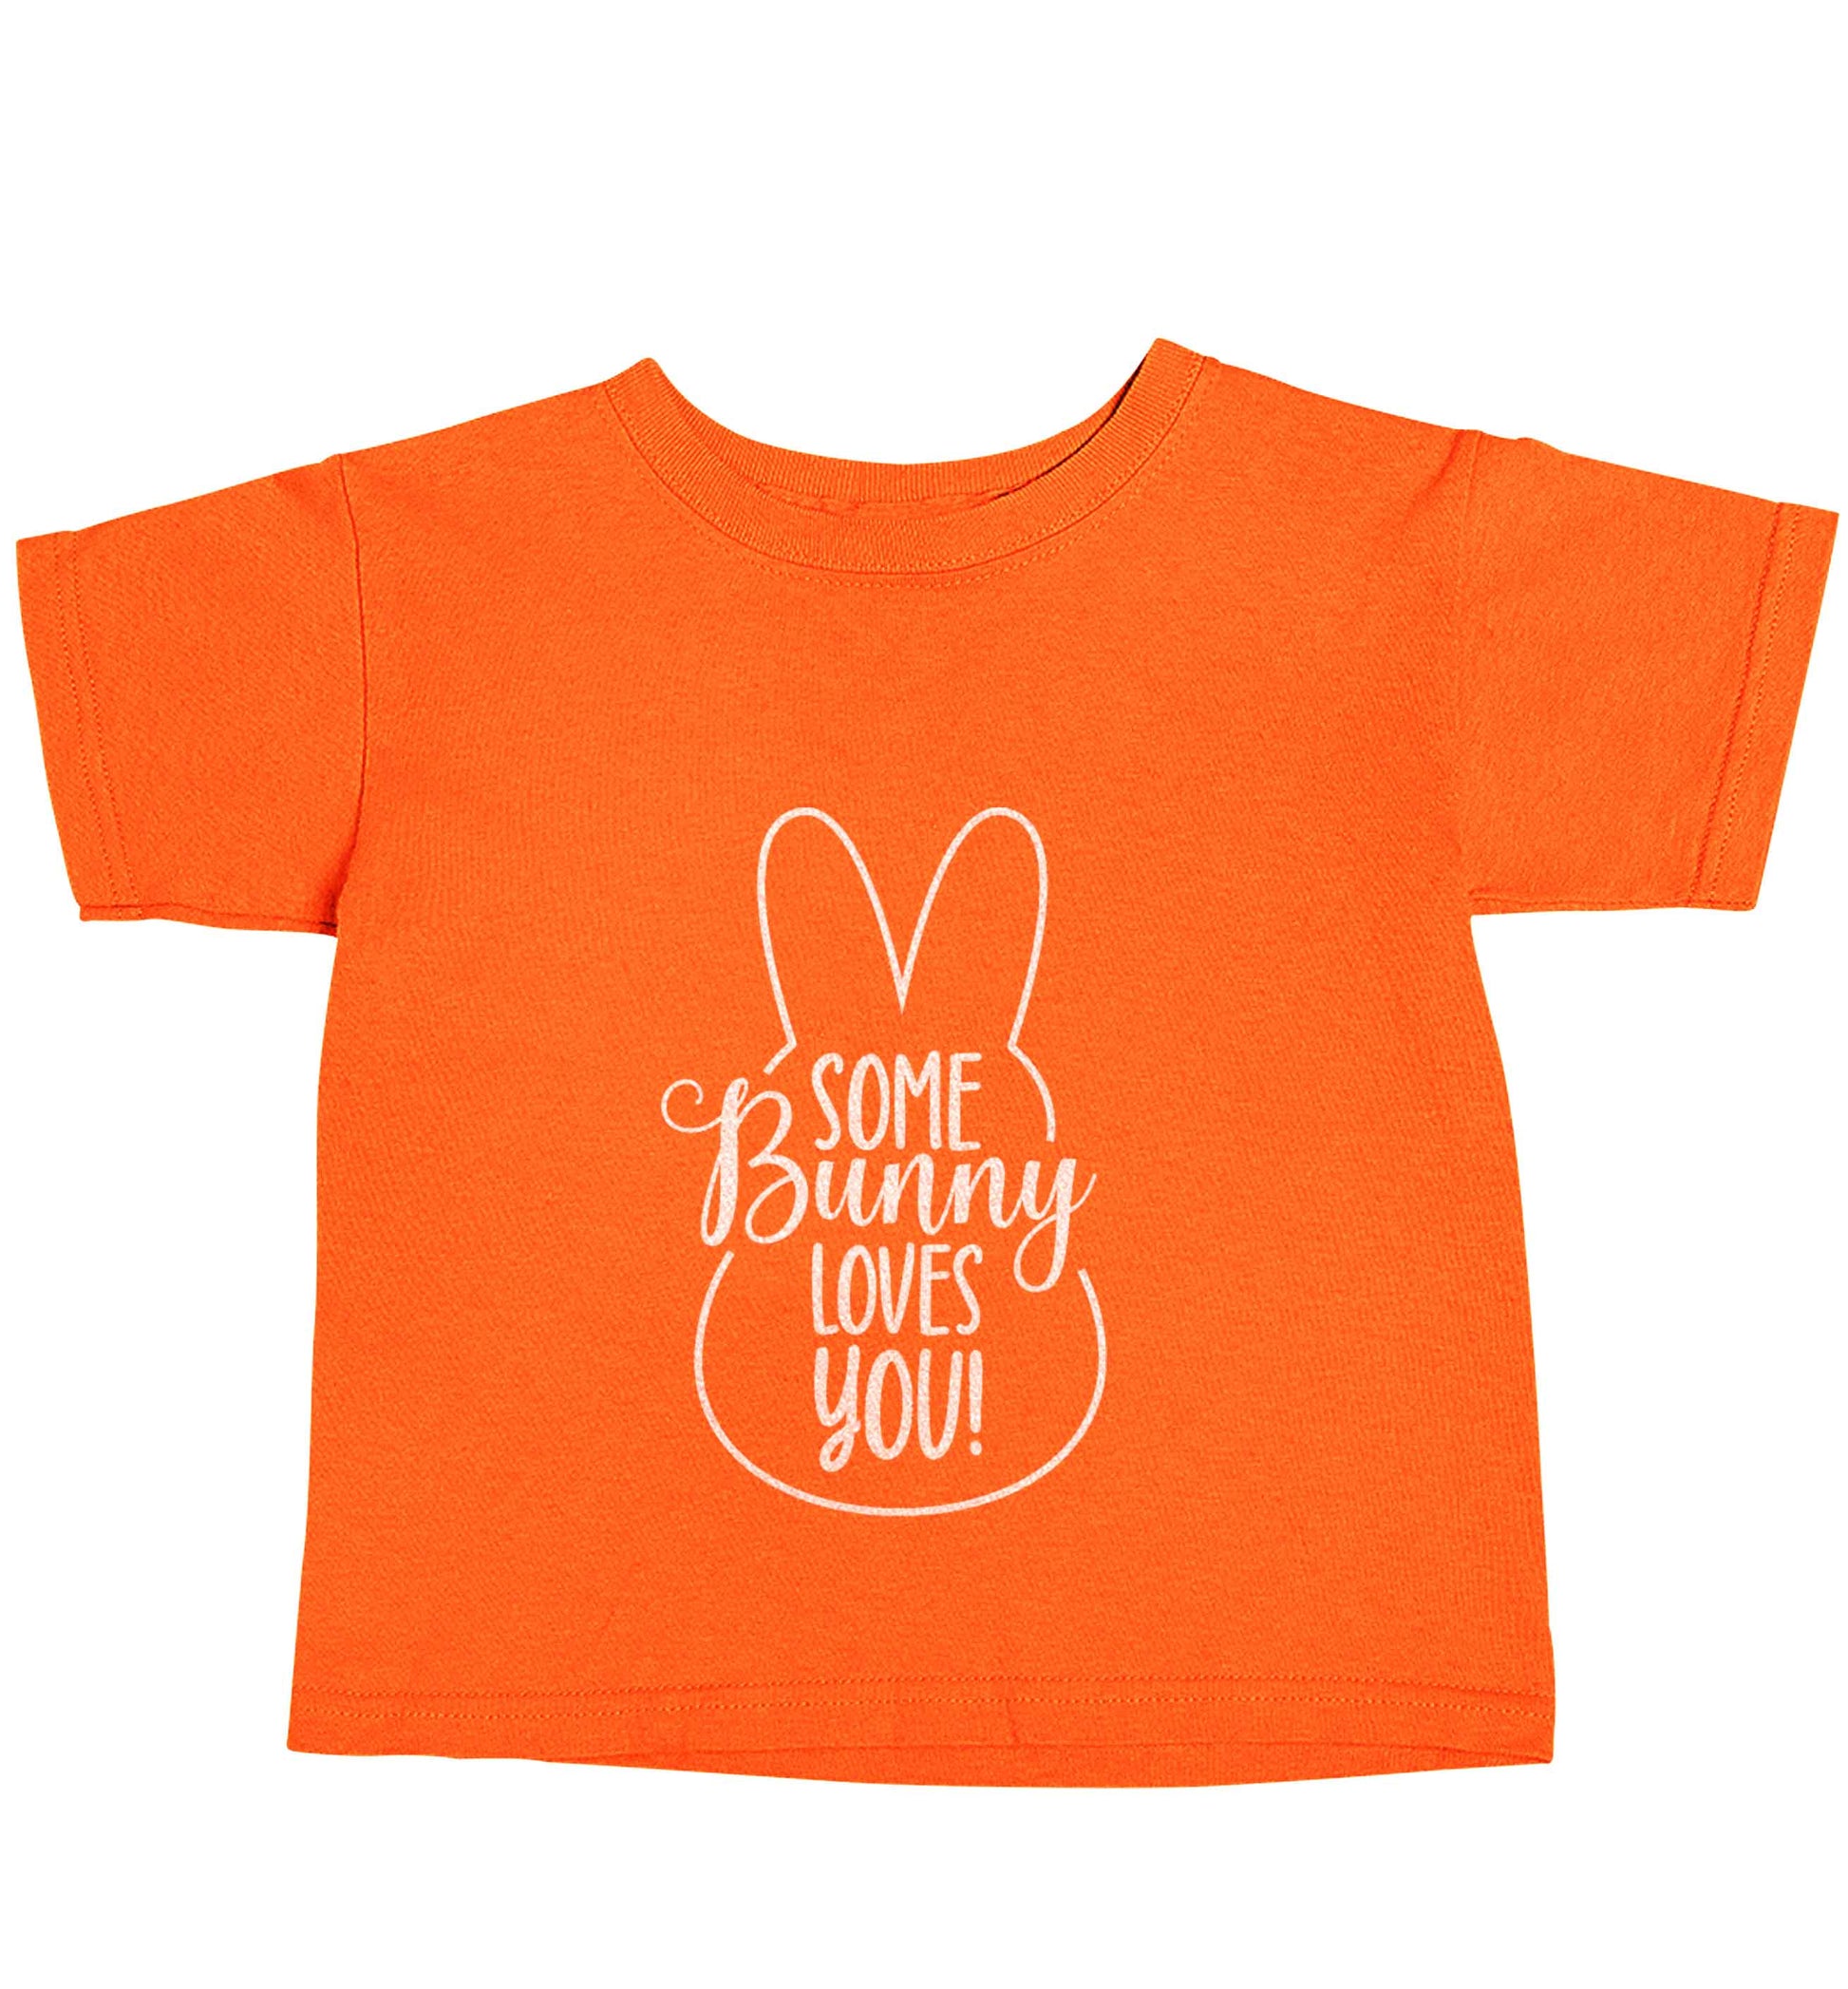 Some bunny loves you orange baby toddler Tshirt 2 Years